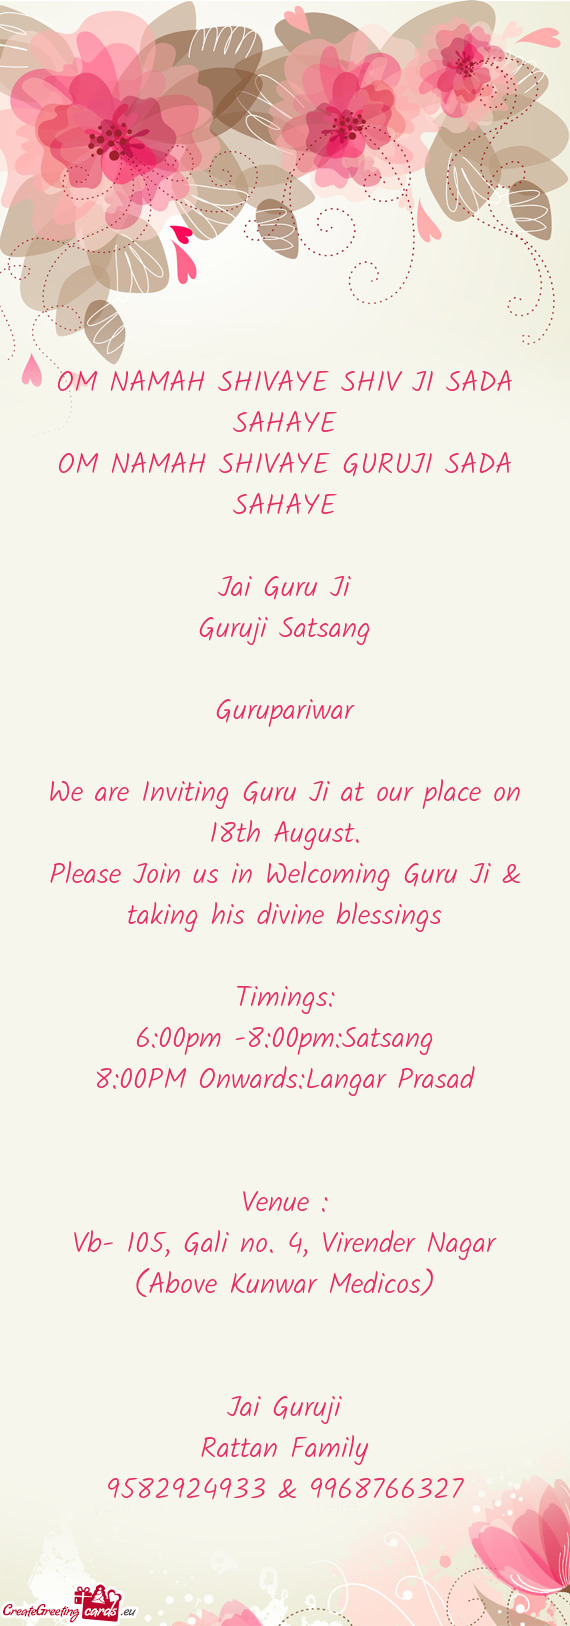 We are Inviting Guru Ji at our place on 18th August